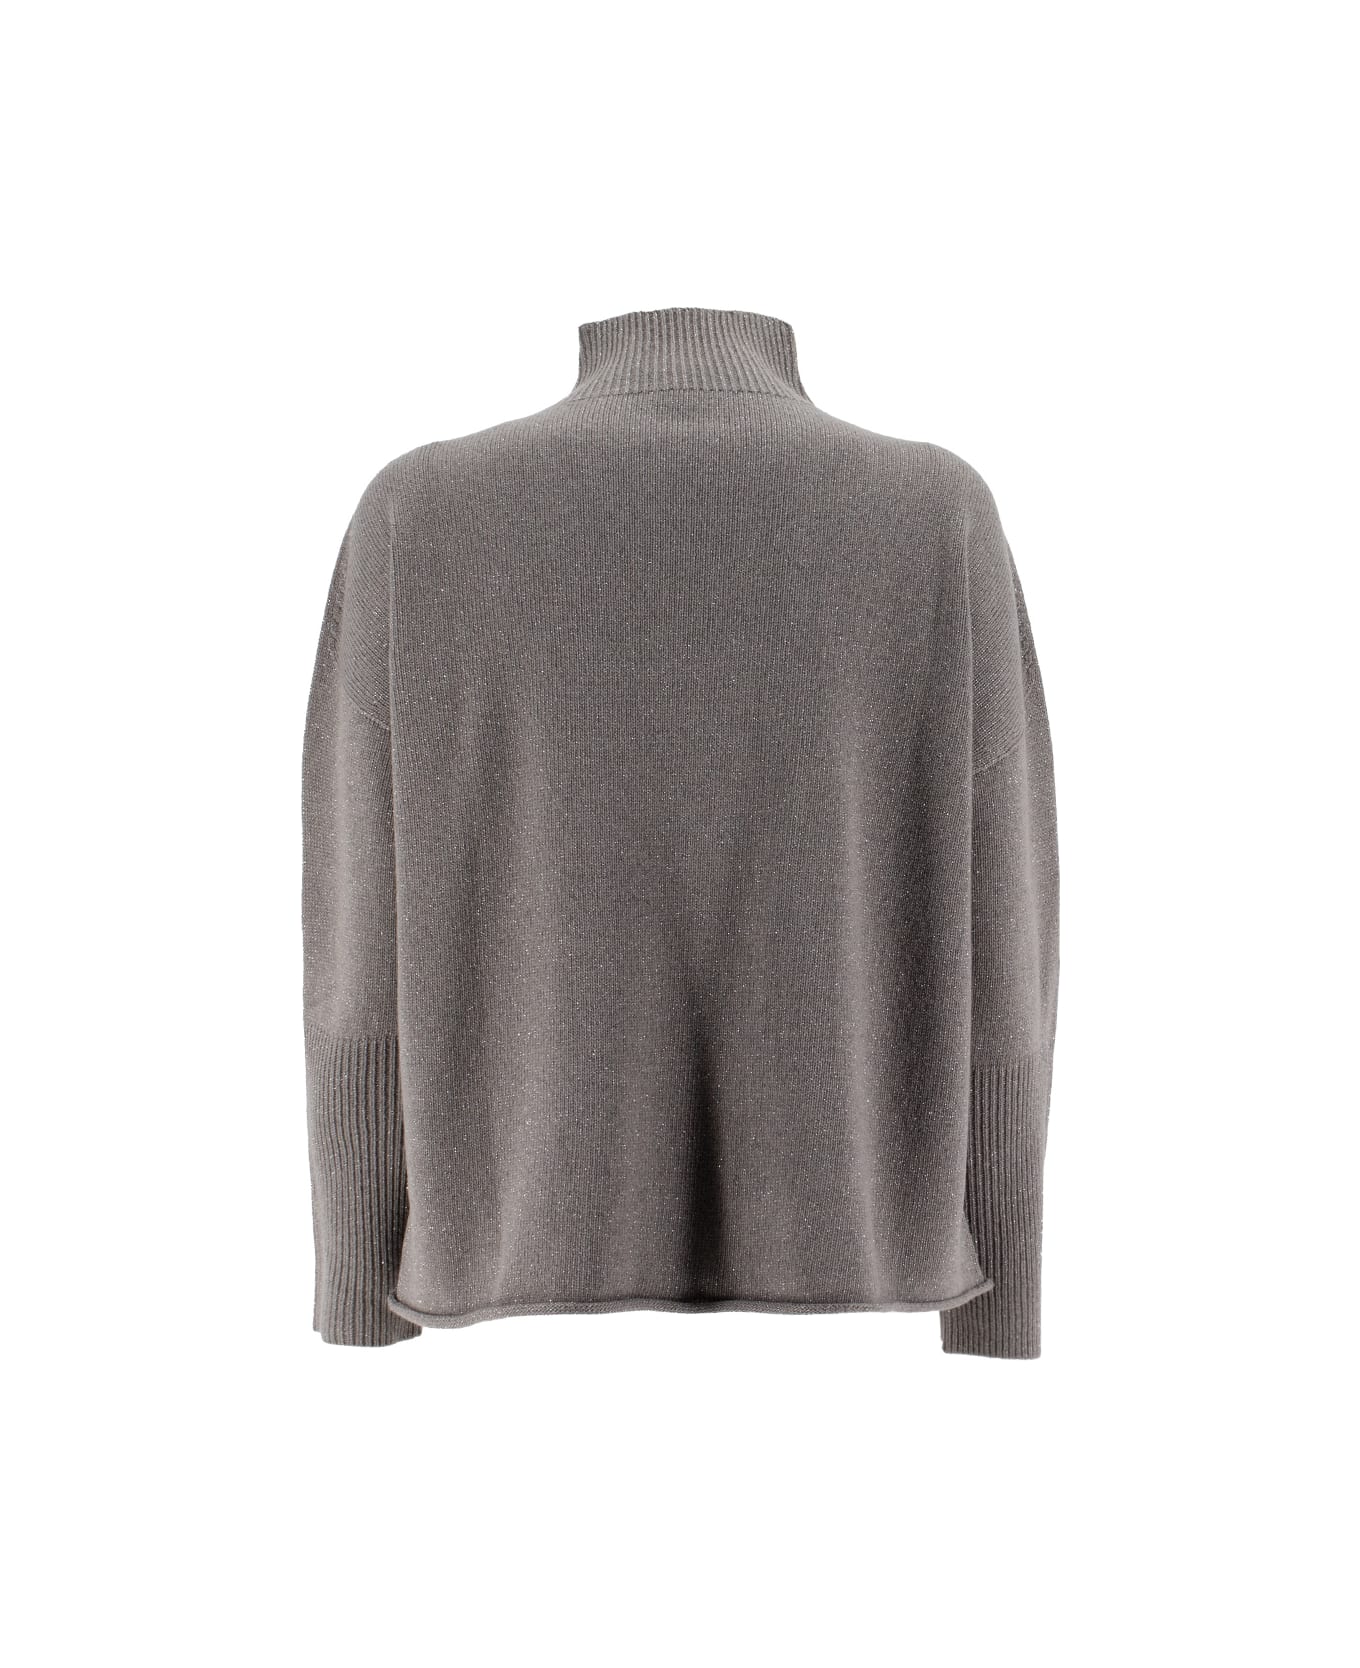 Le Tricot Perugia Sweater - TAUPE/GREY LX